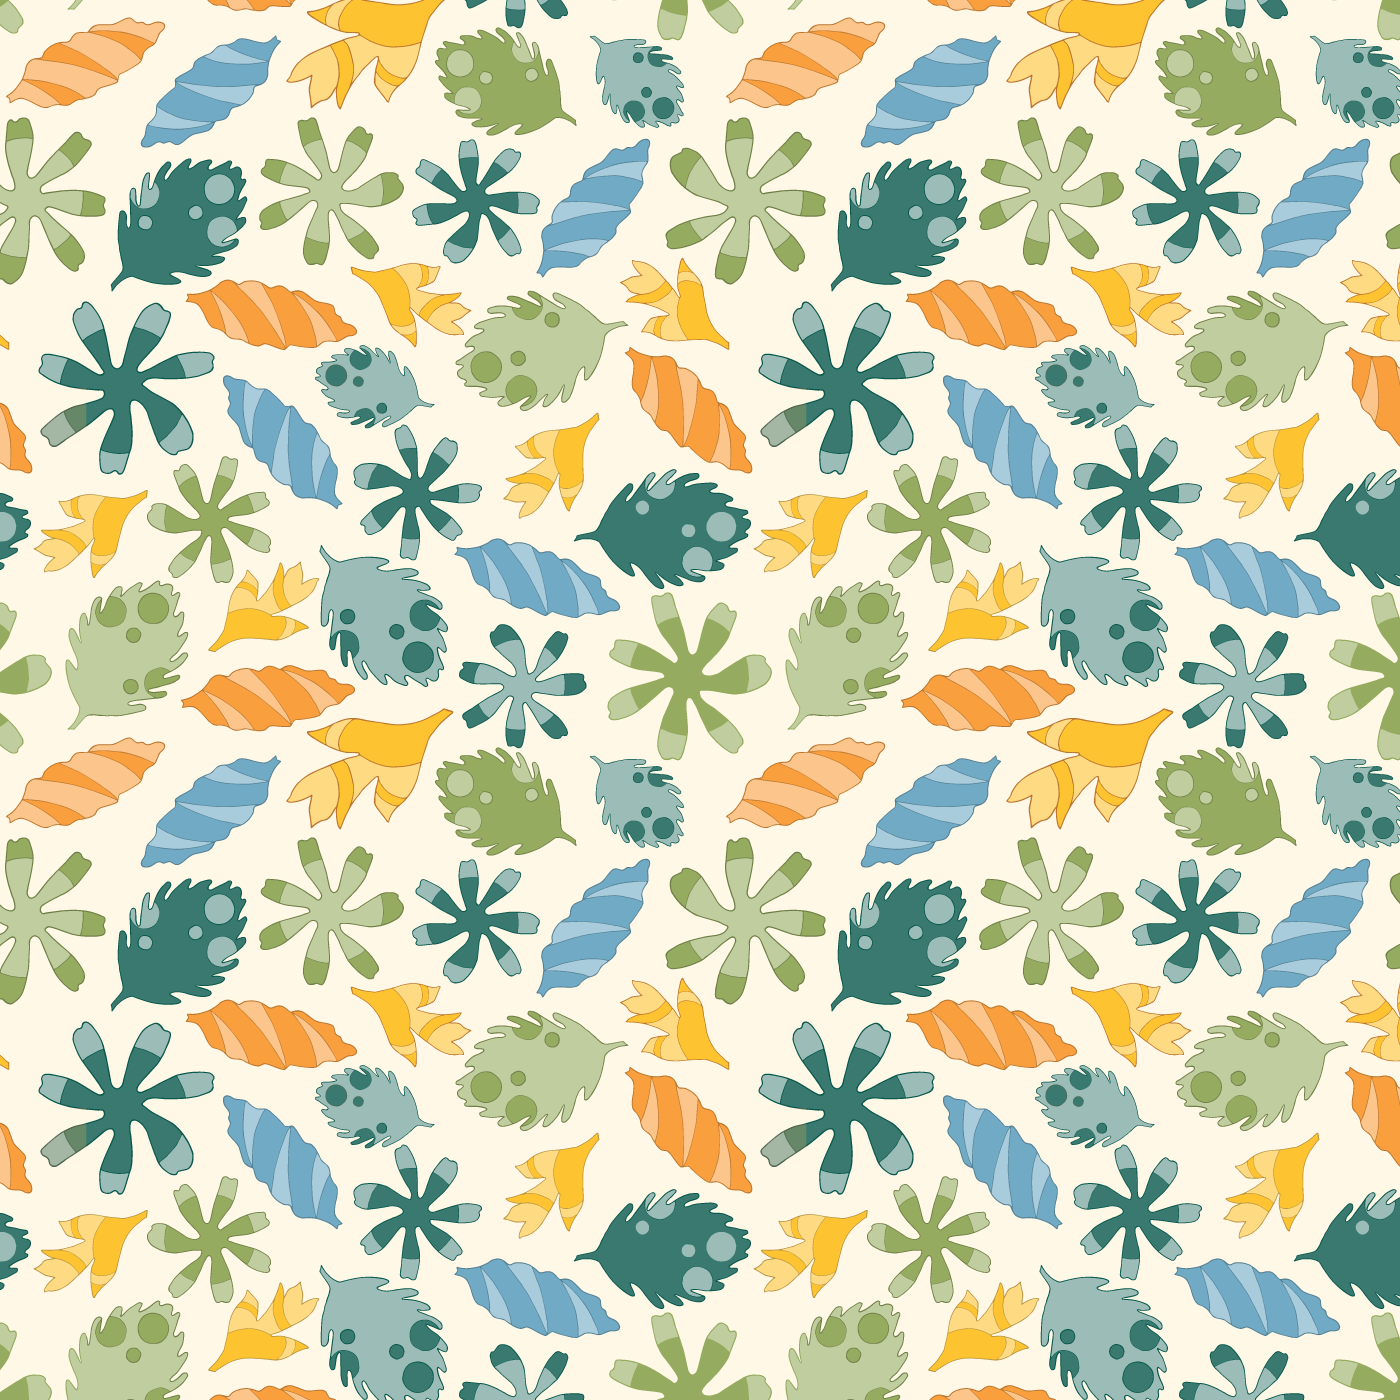 Scattered Leaves in Citrus Colors